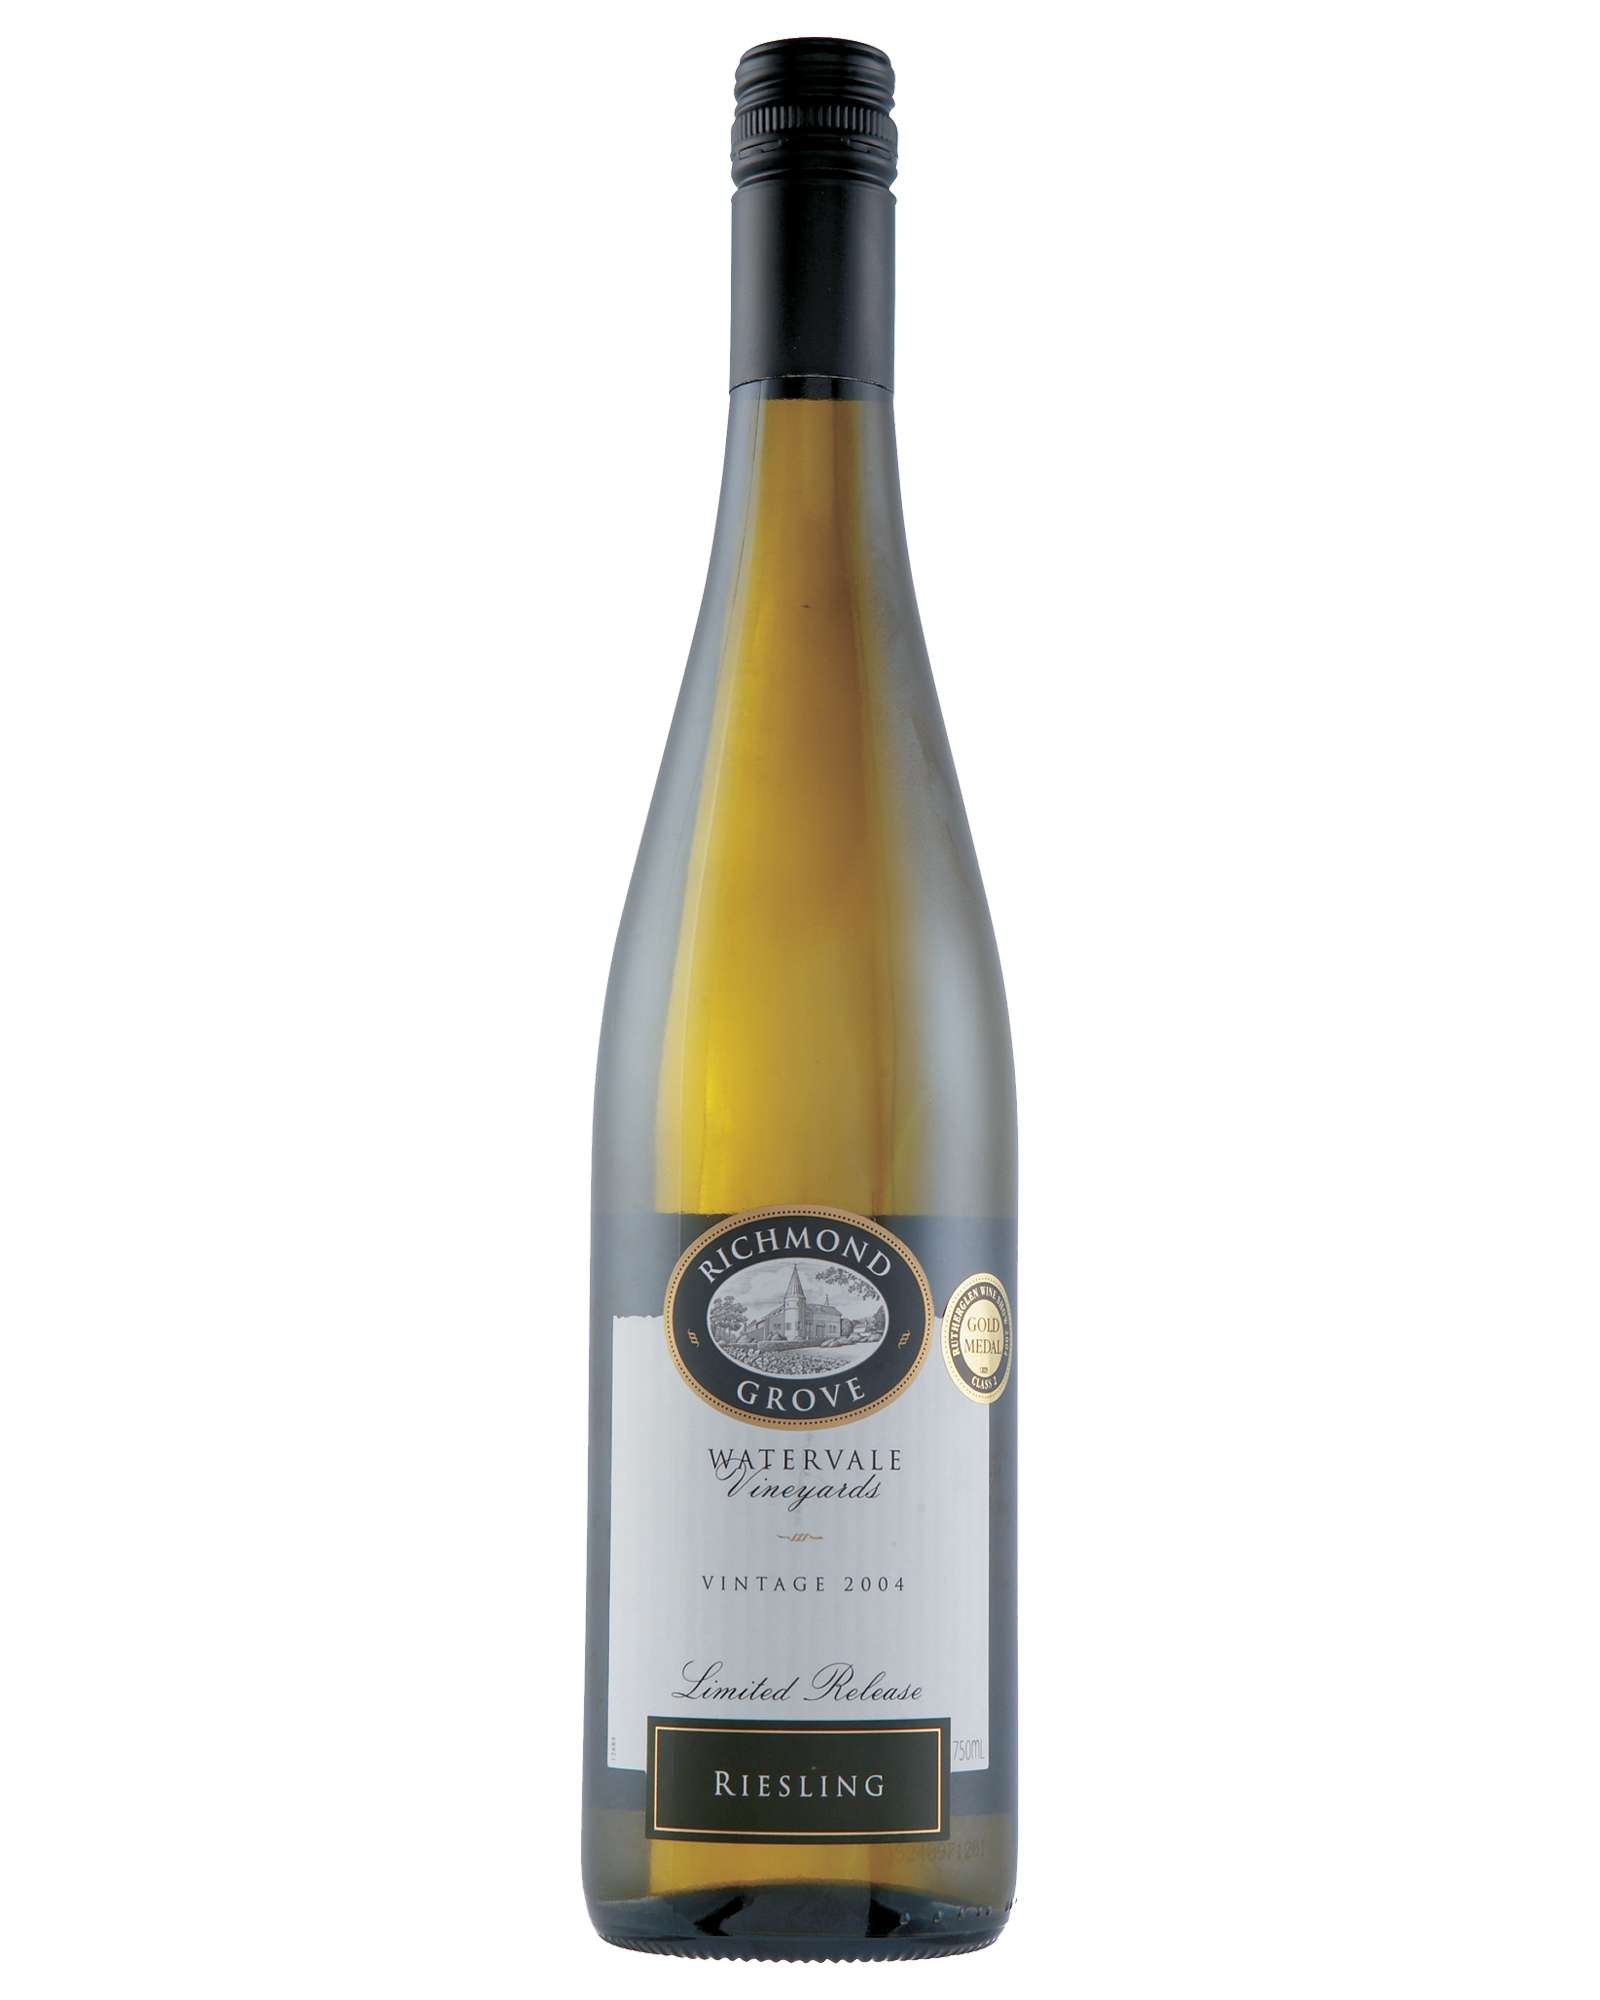 Richmond Grove Limited Release Riesling 2004